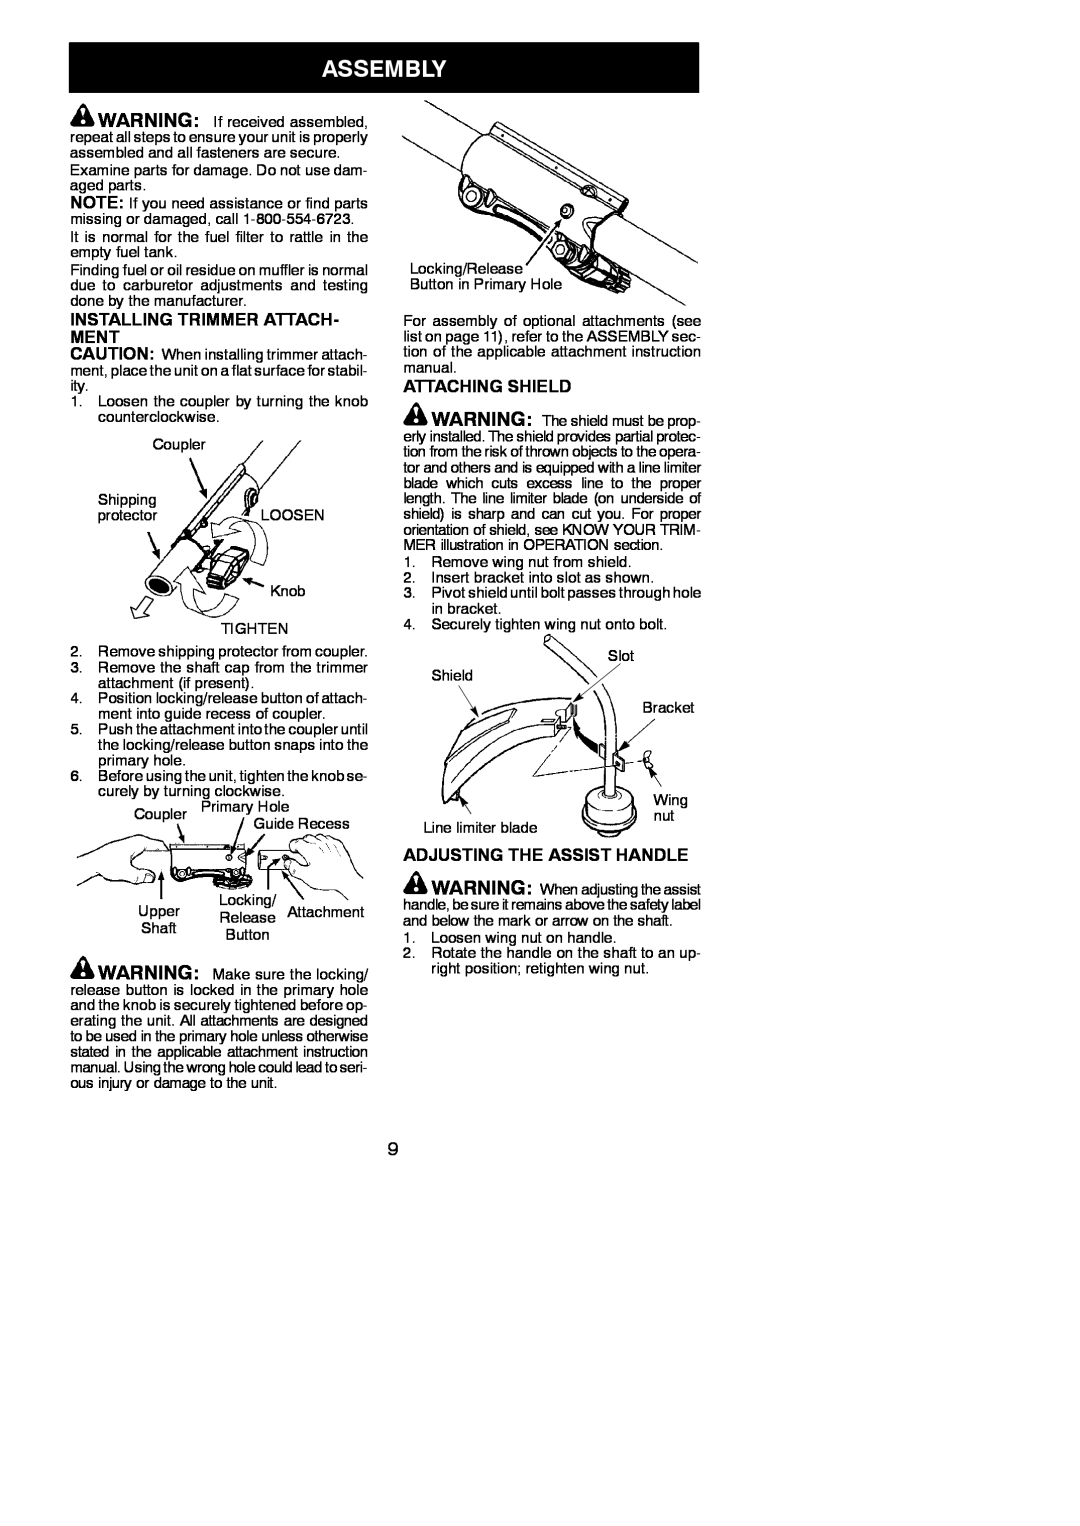 Poulan 115248726, 952711943 Assembly, Installing Trimmer Attach- Ment, Attaching Shield, Adjusting The Assist Handle 